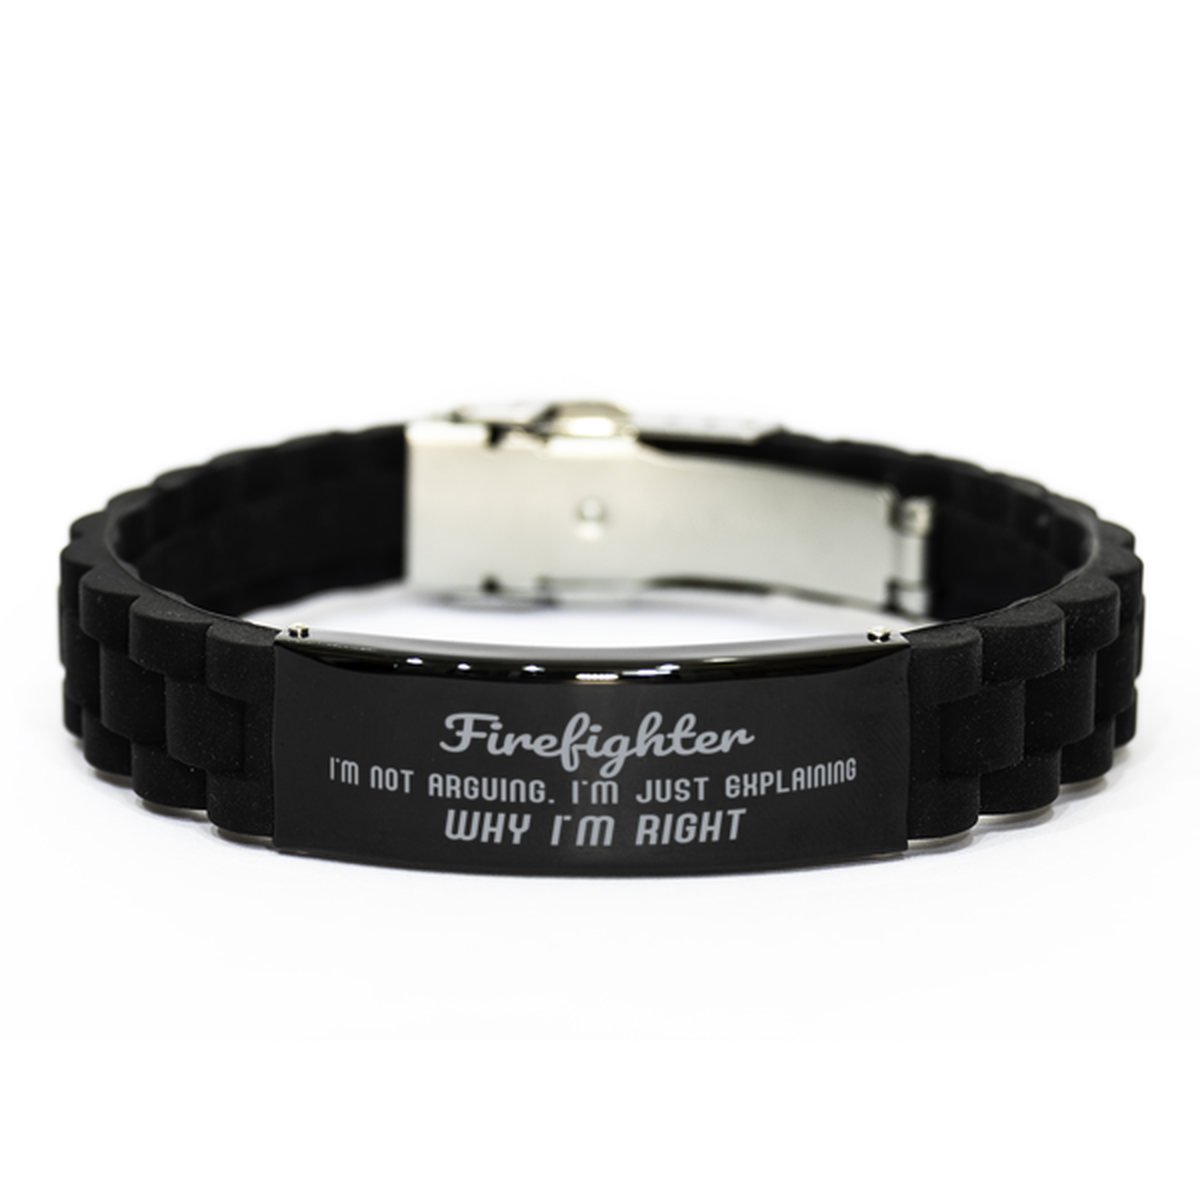 Firefighter I'm not Arguing. I'm Just Explaining Why I'm RIGHT Black Glidelock Clasp Bracelet, Funny Saying Quote Firefighter Gifts For Firefighter Graduation Birthday Christmas Gifts for Men Women Coworker